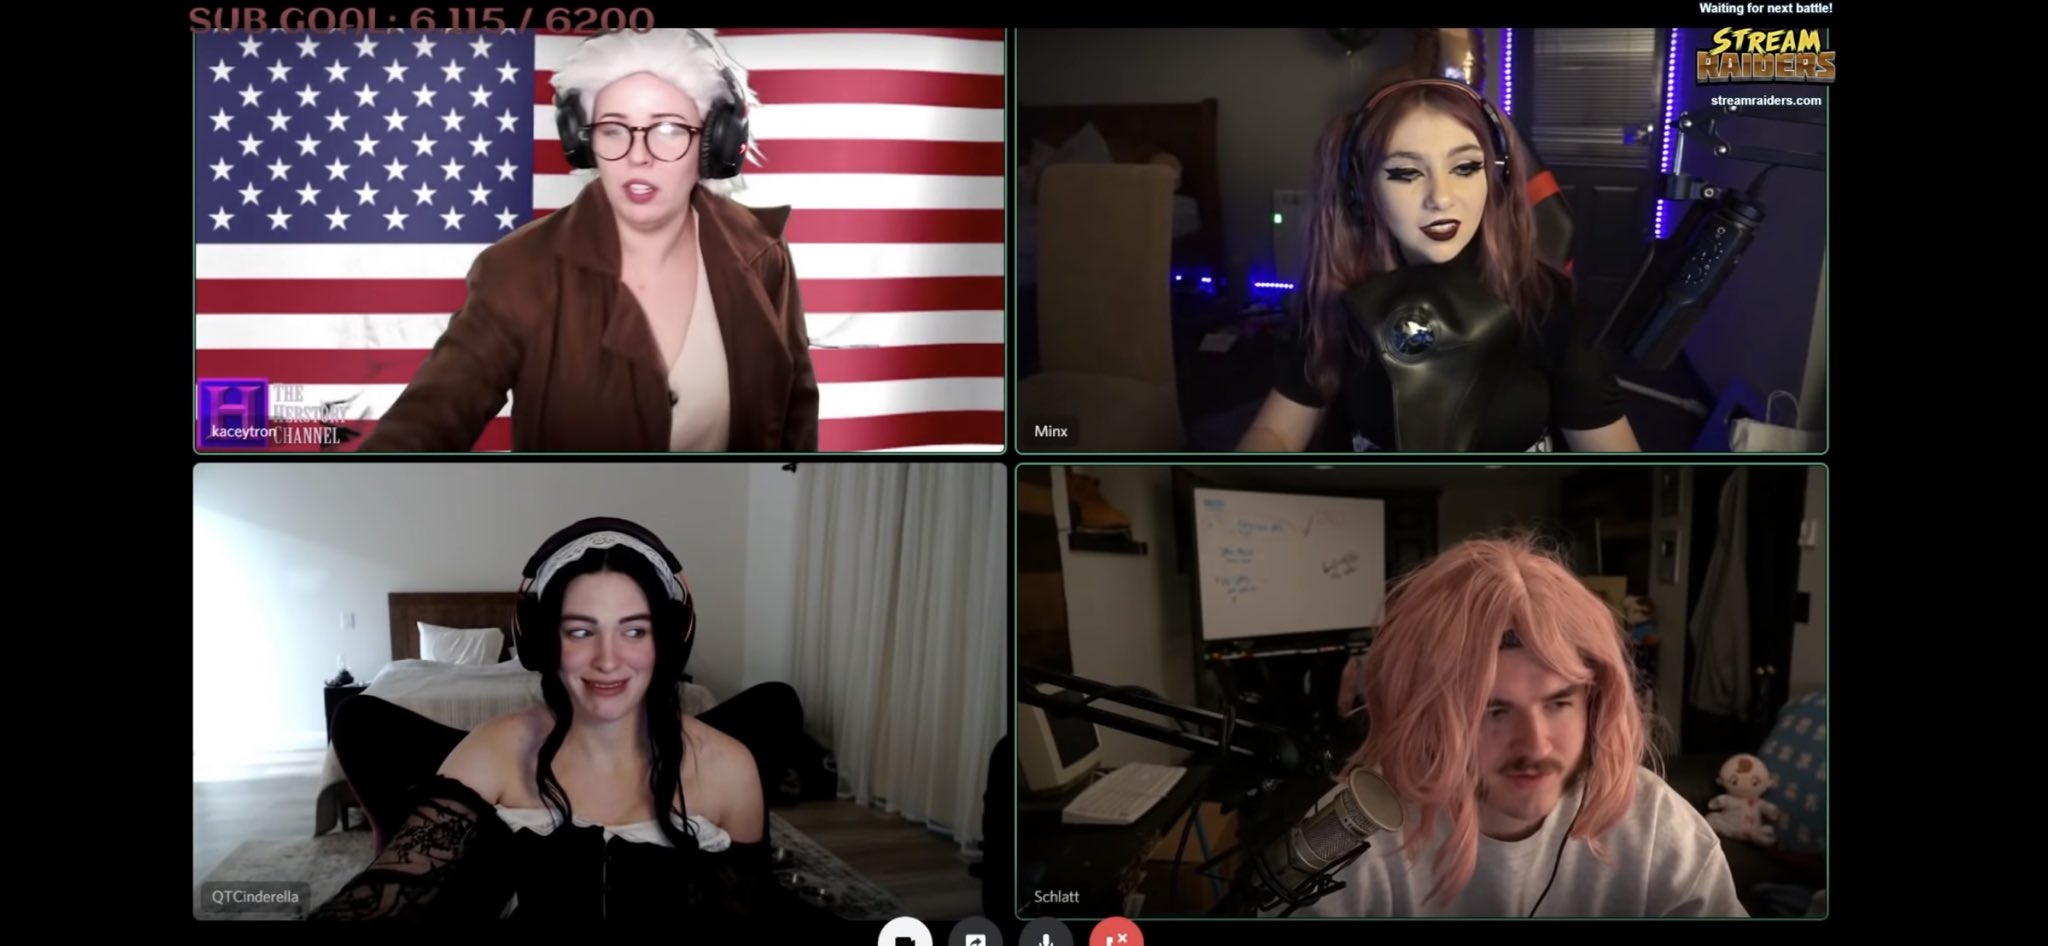 She is not being a lady': Twitch streamer QTCinderella lashes out